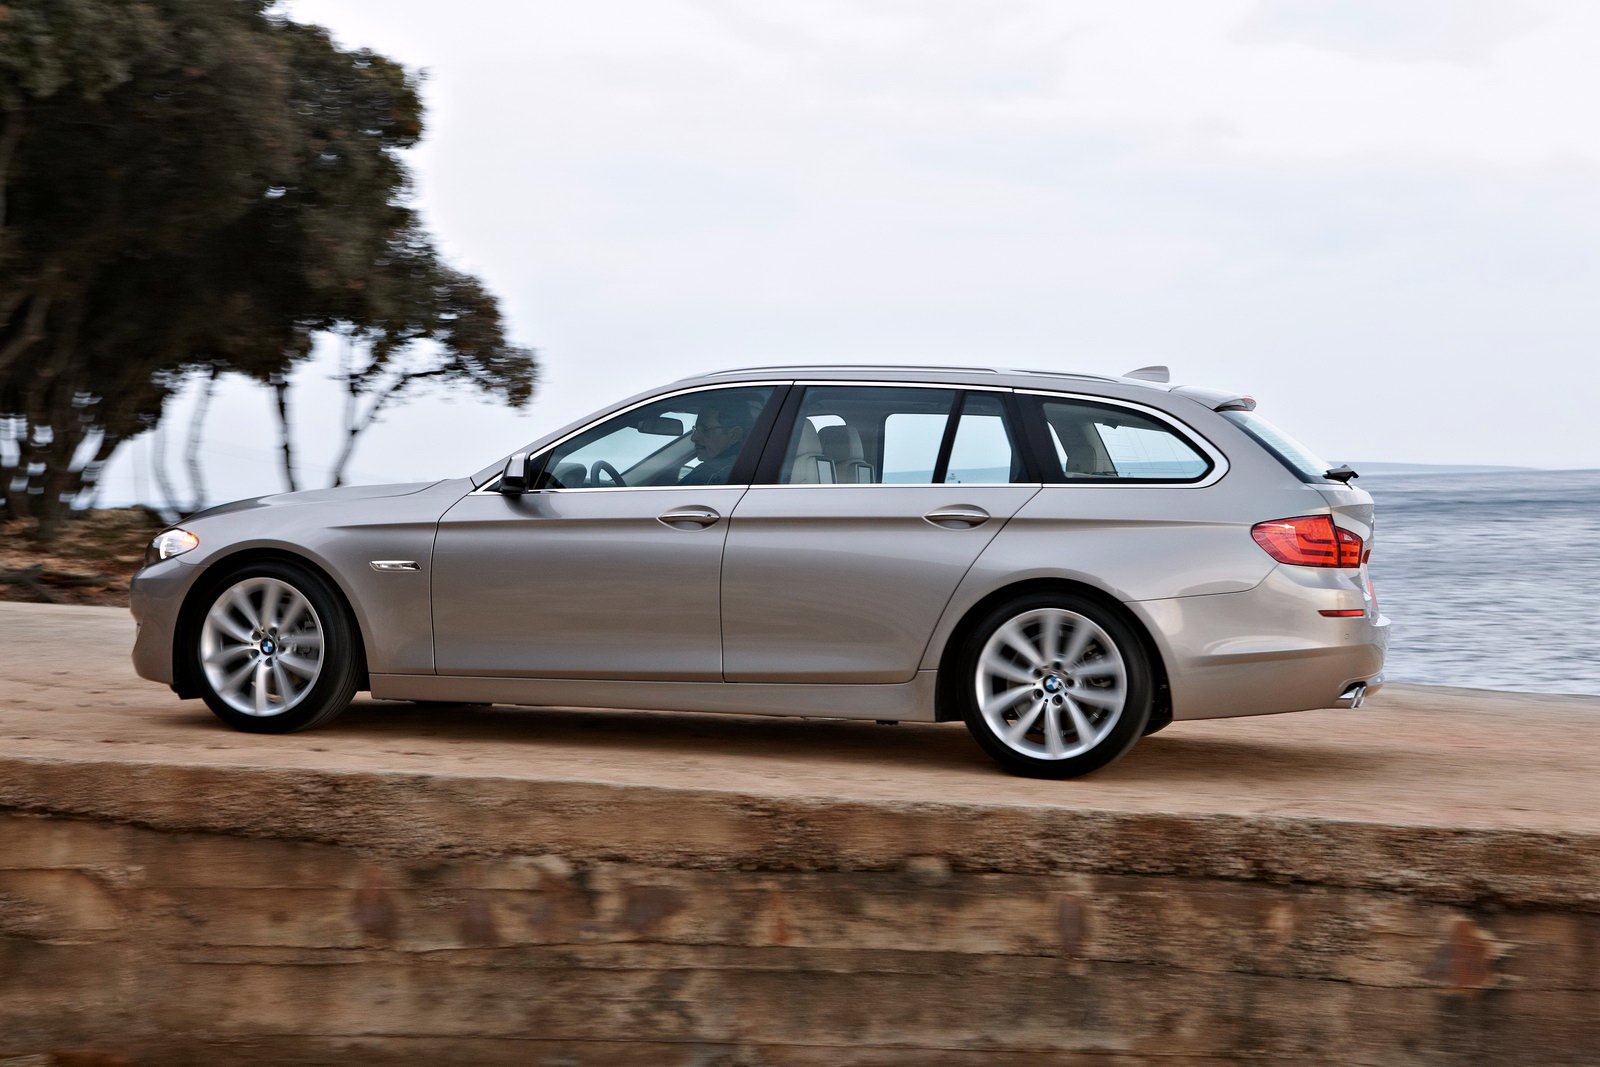 New BMW 5 Series Touring (Wagon) not Coming to North America